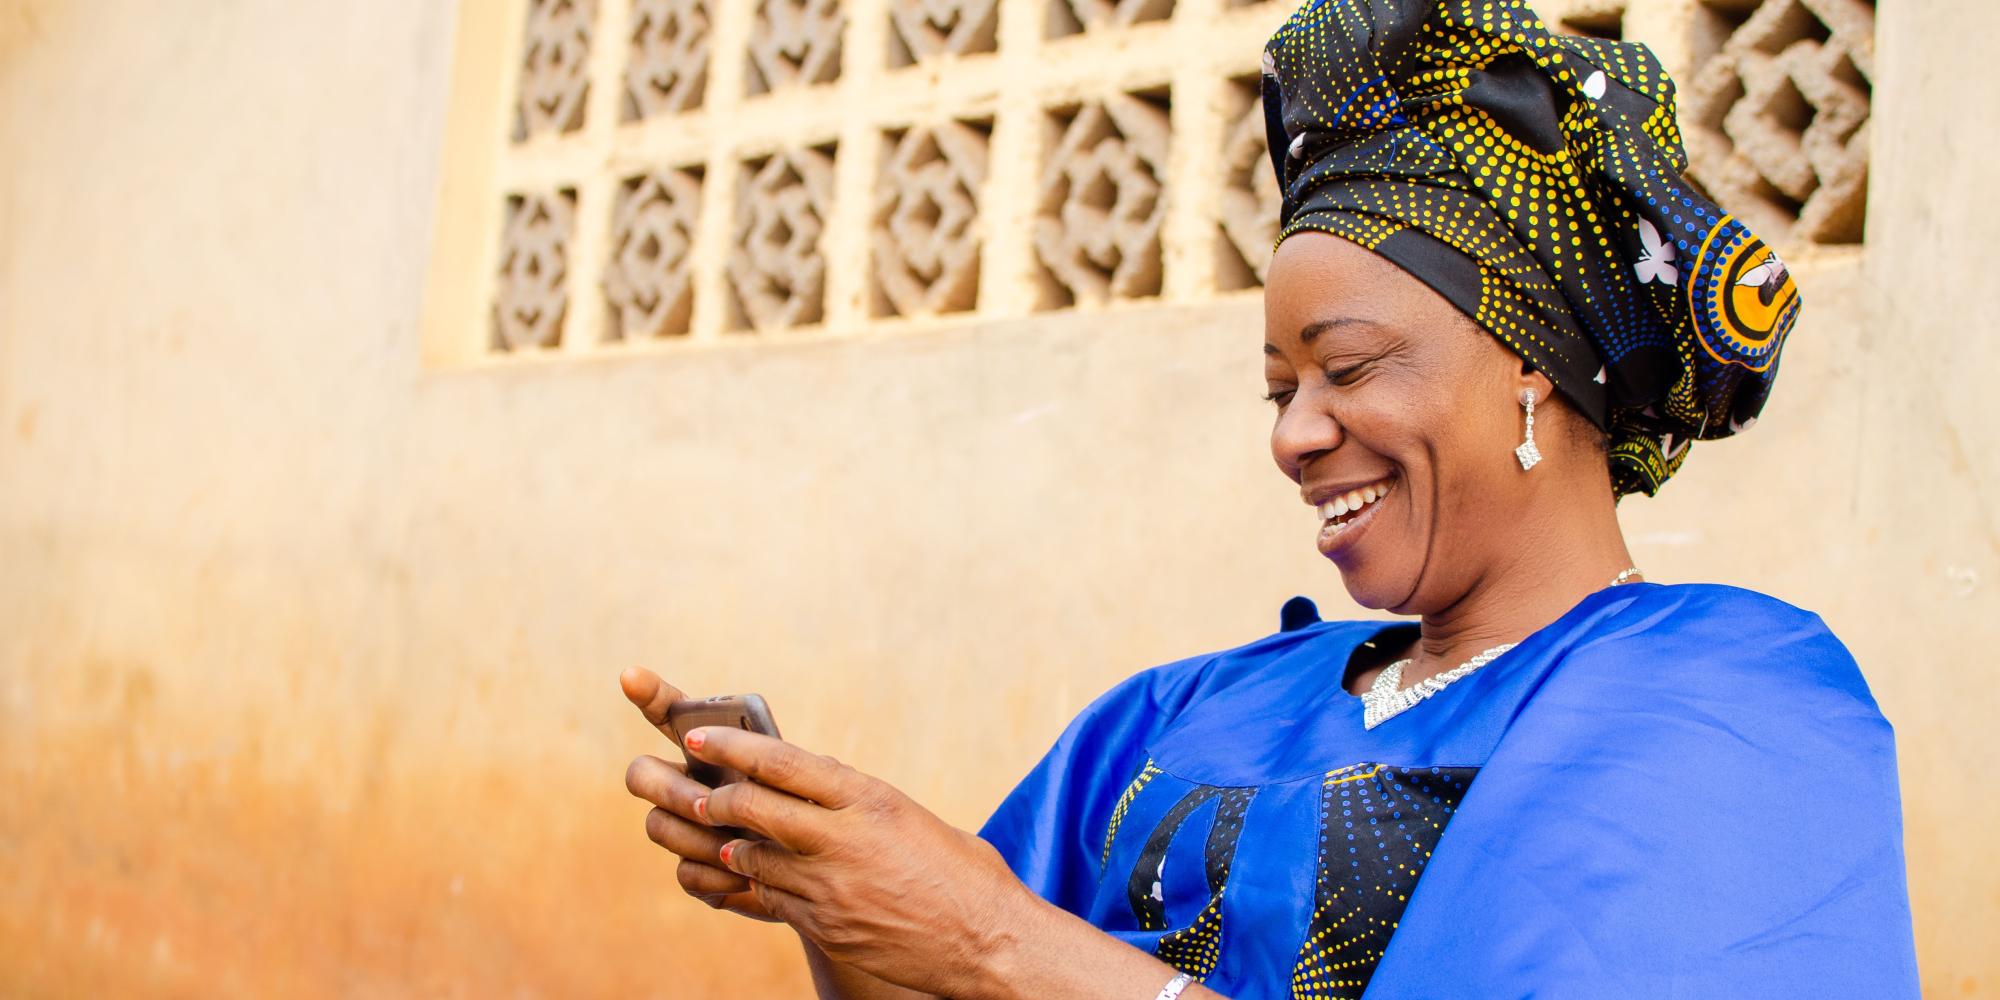 Nigerian woman smiling while using mobile phone